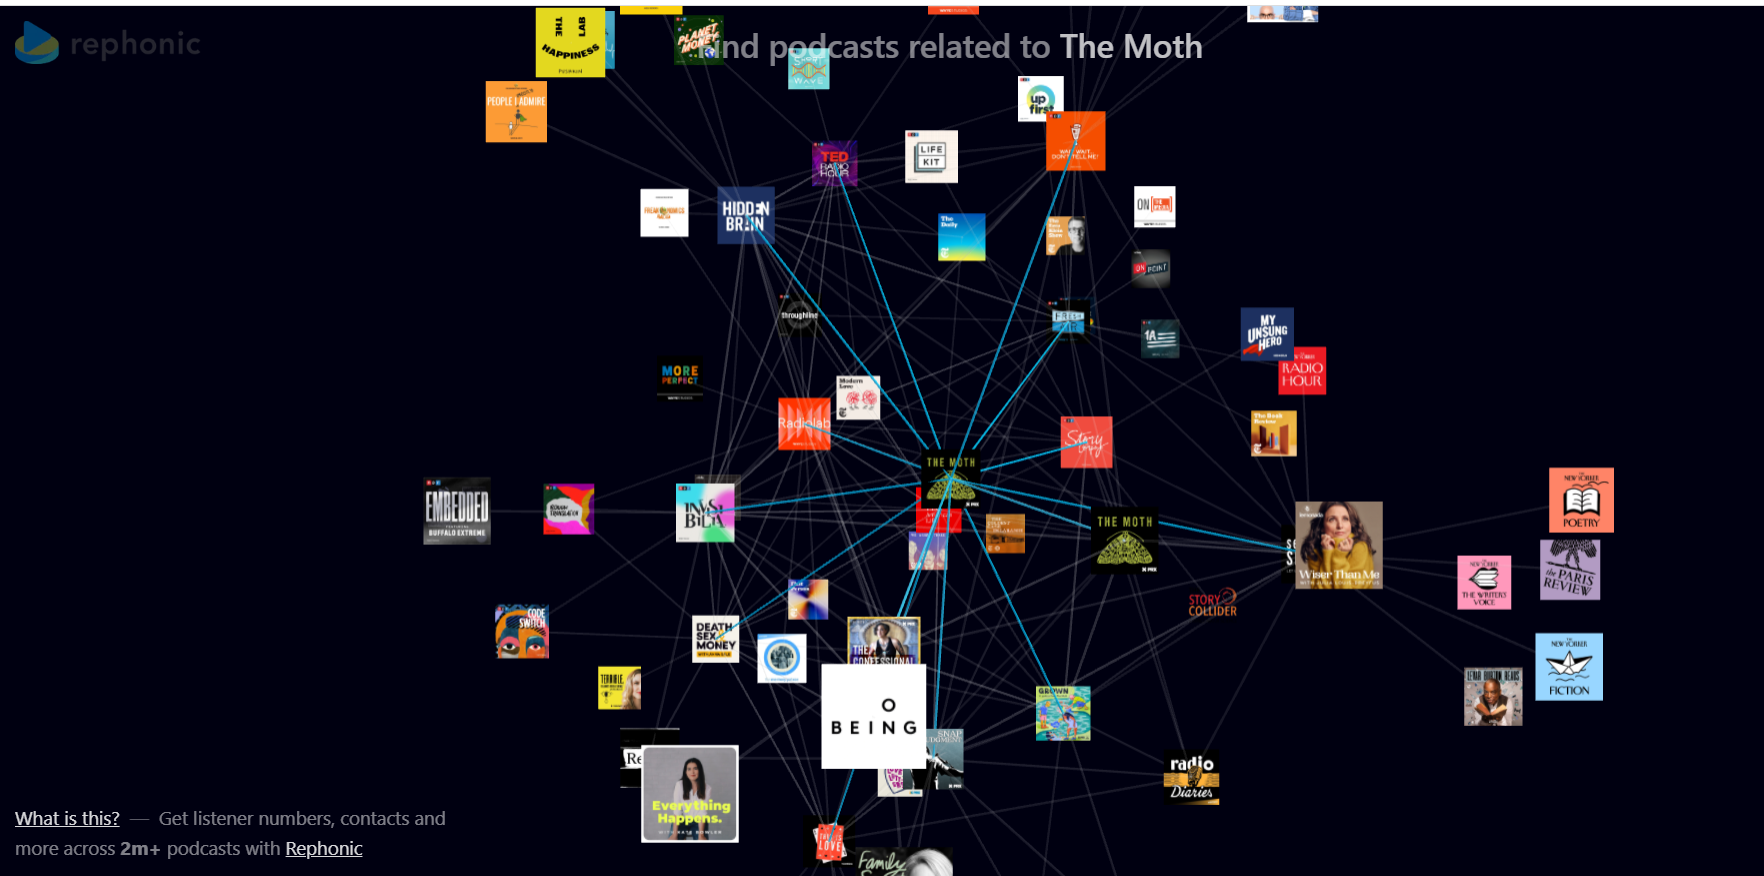 Rephonic 3D graph tool to find similar podcasts to The Moth